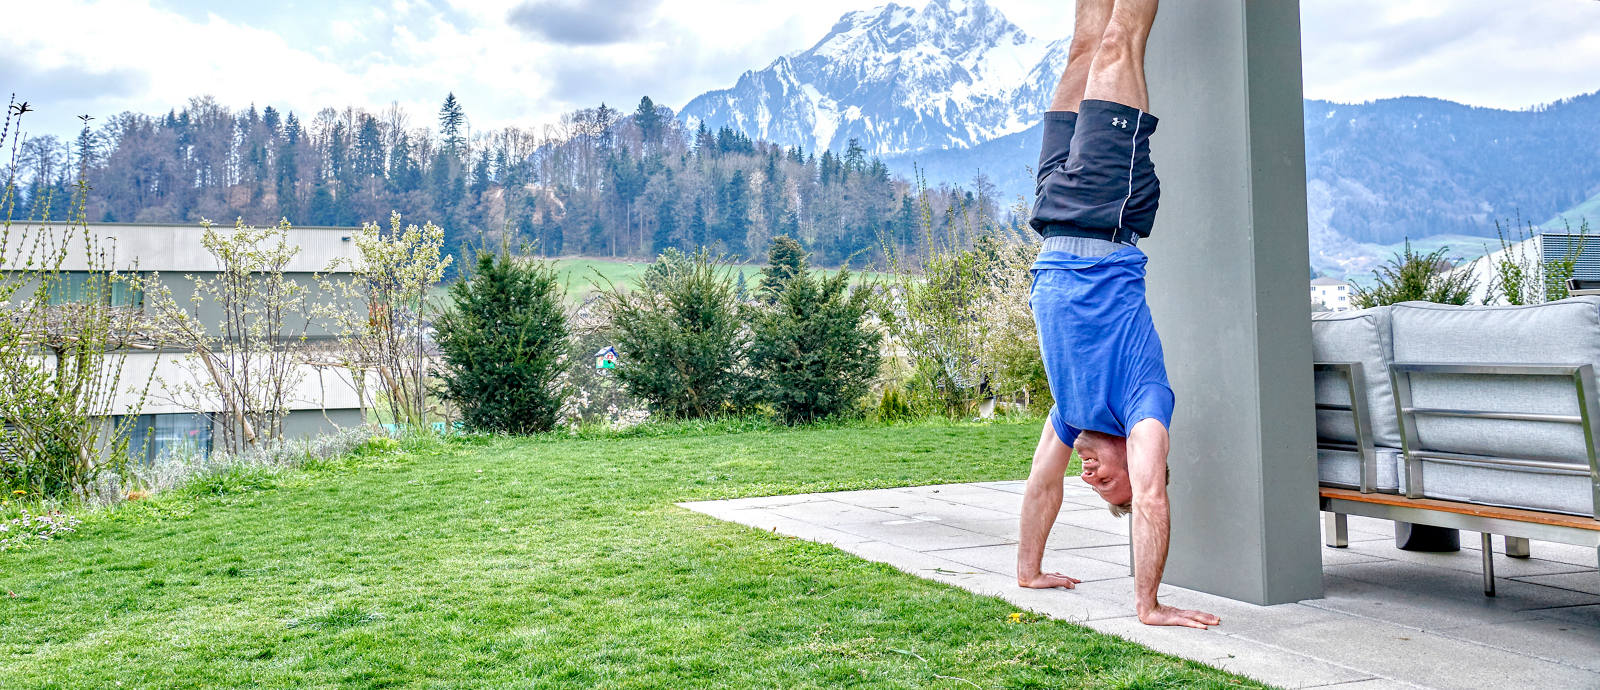 Learn to do the handstand: with momentum against the wall